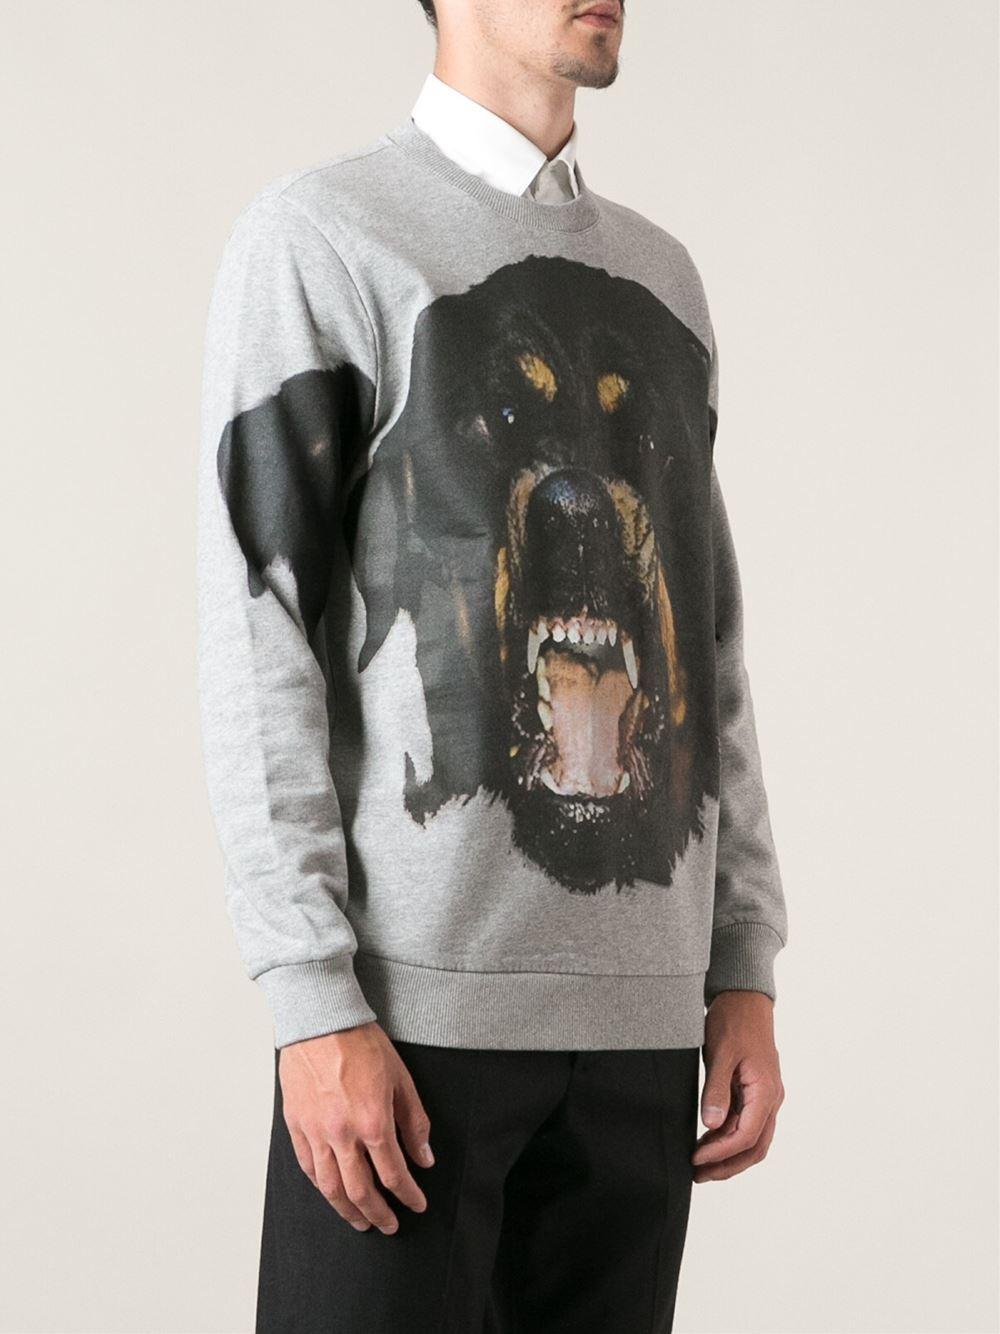 Lyst - Givenchy Rottweiler Sweatshirt in Gray for Men